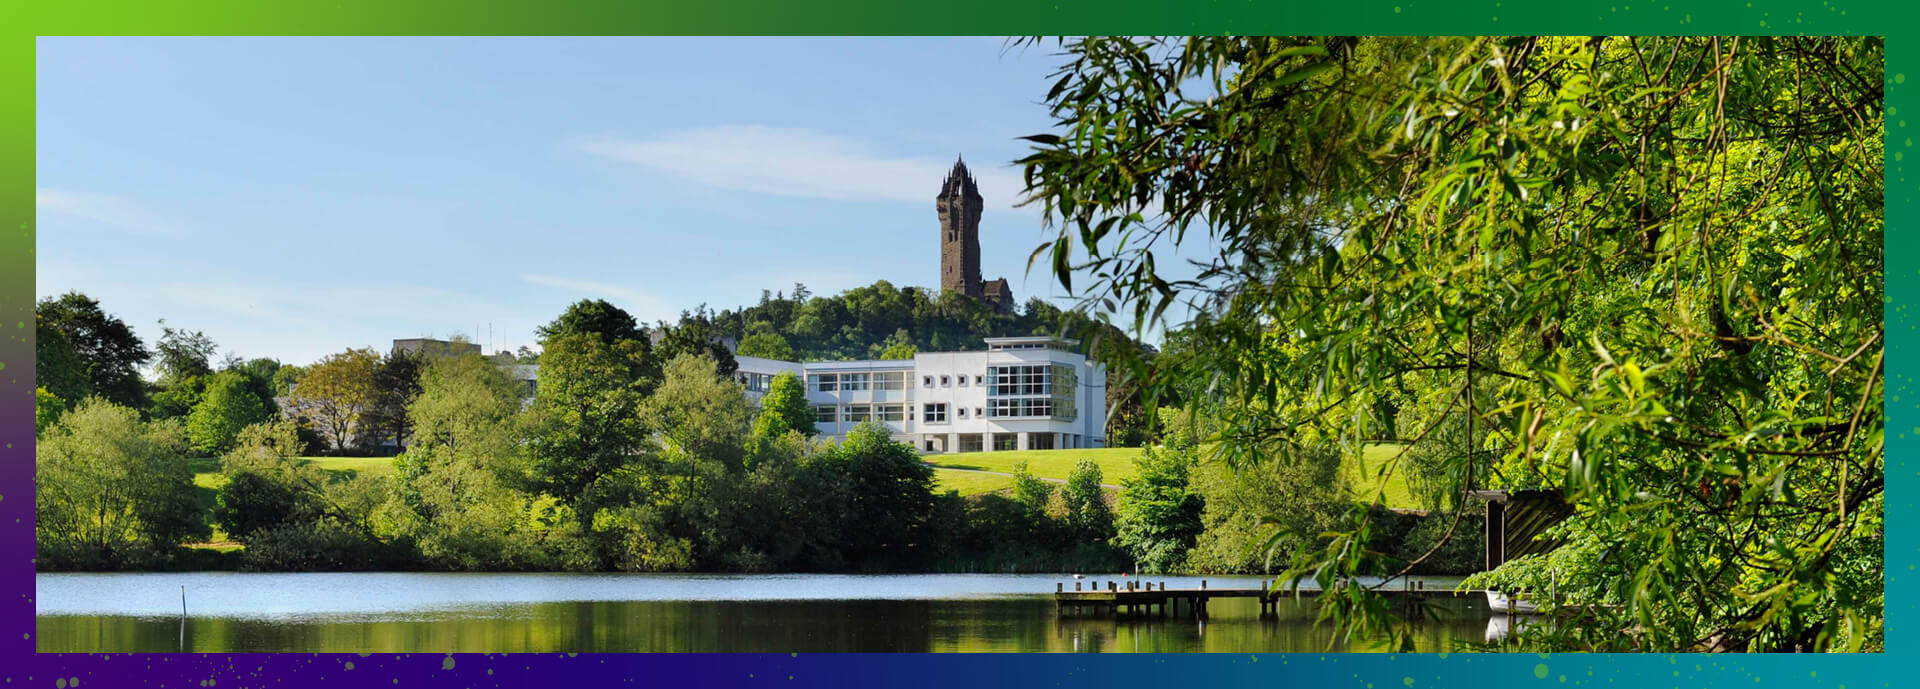 Airthrey Loch and Wallace Monument.